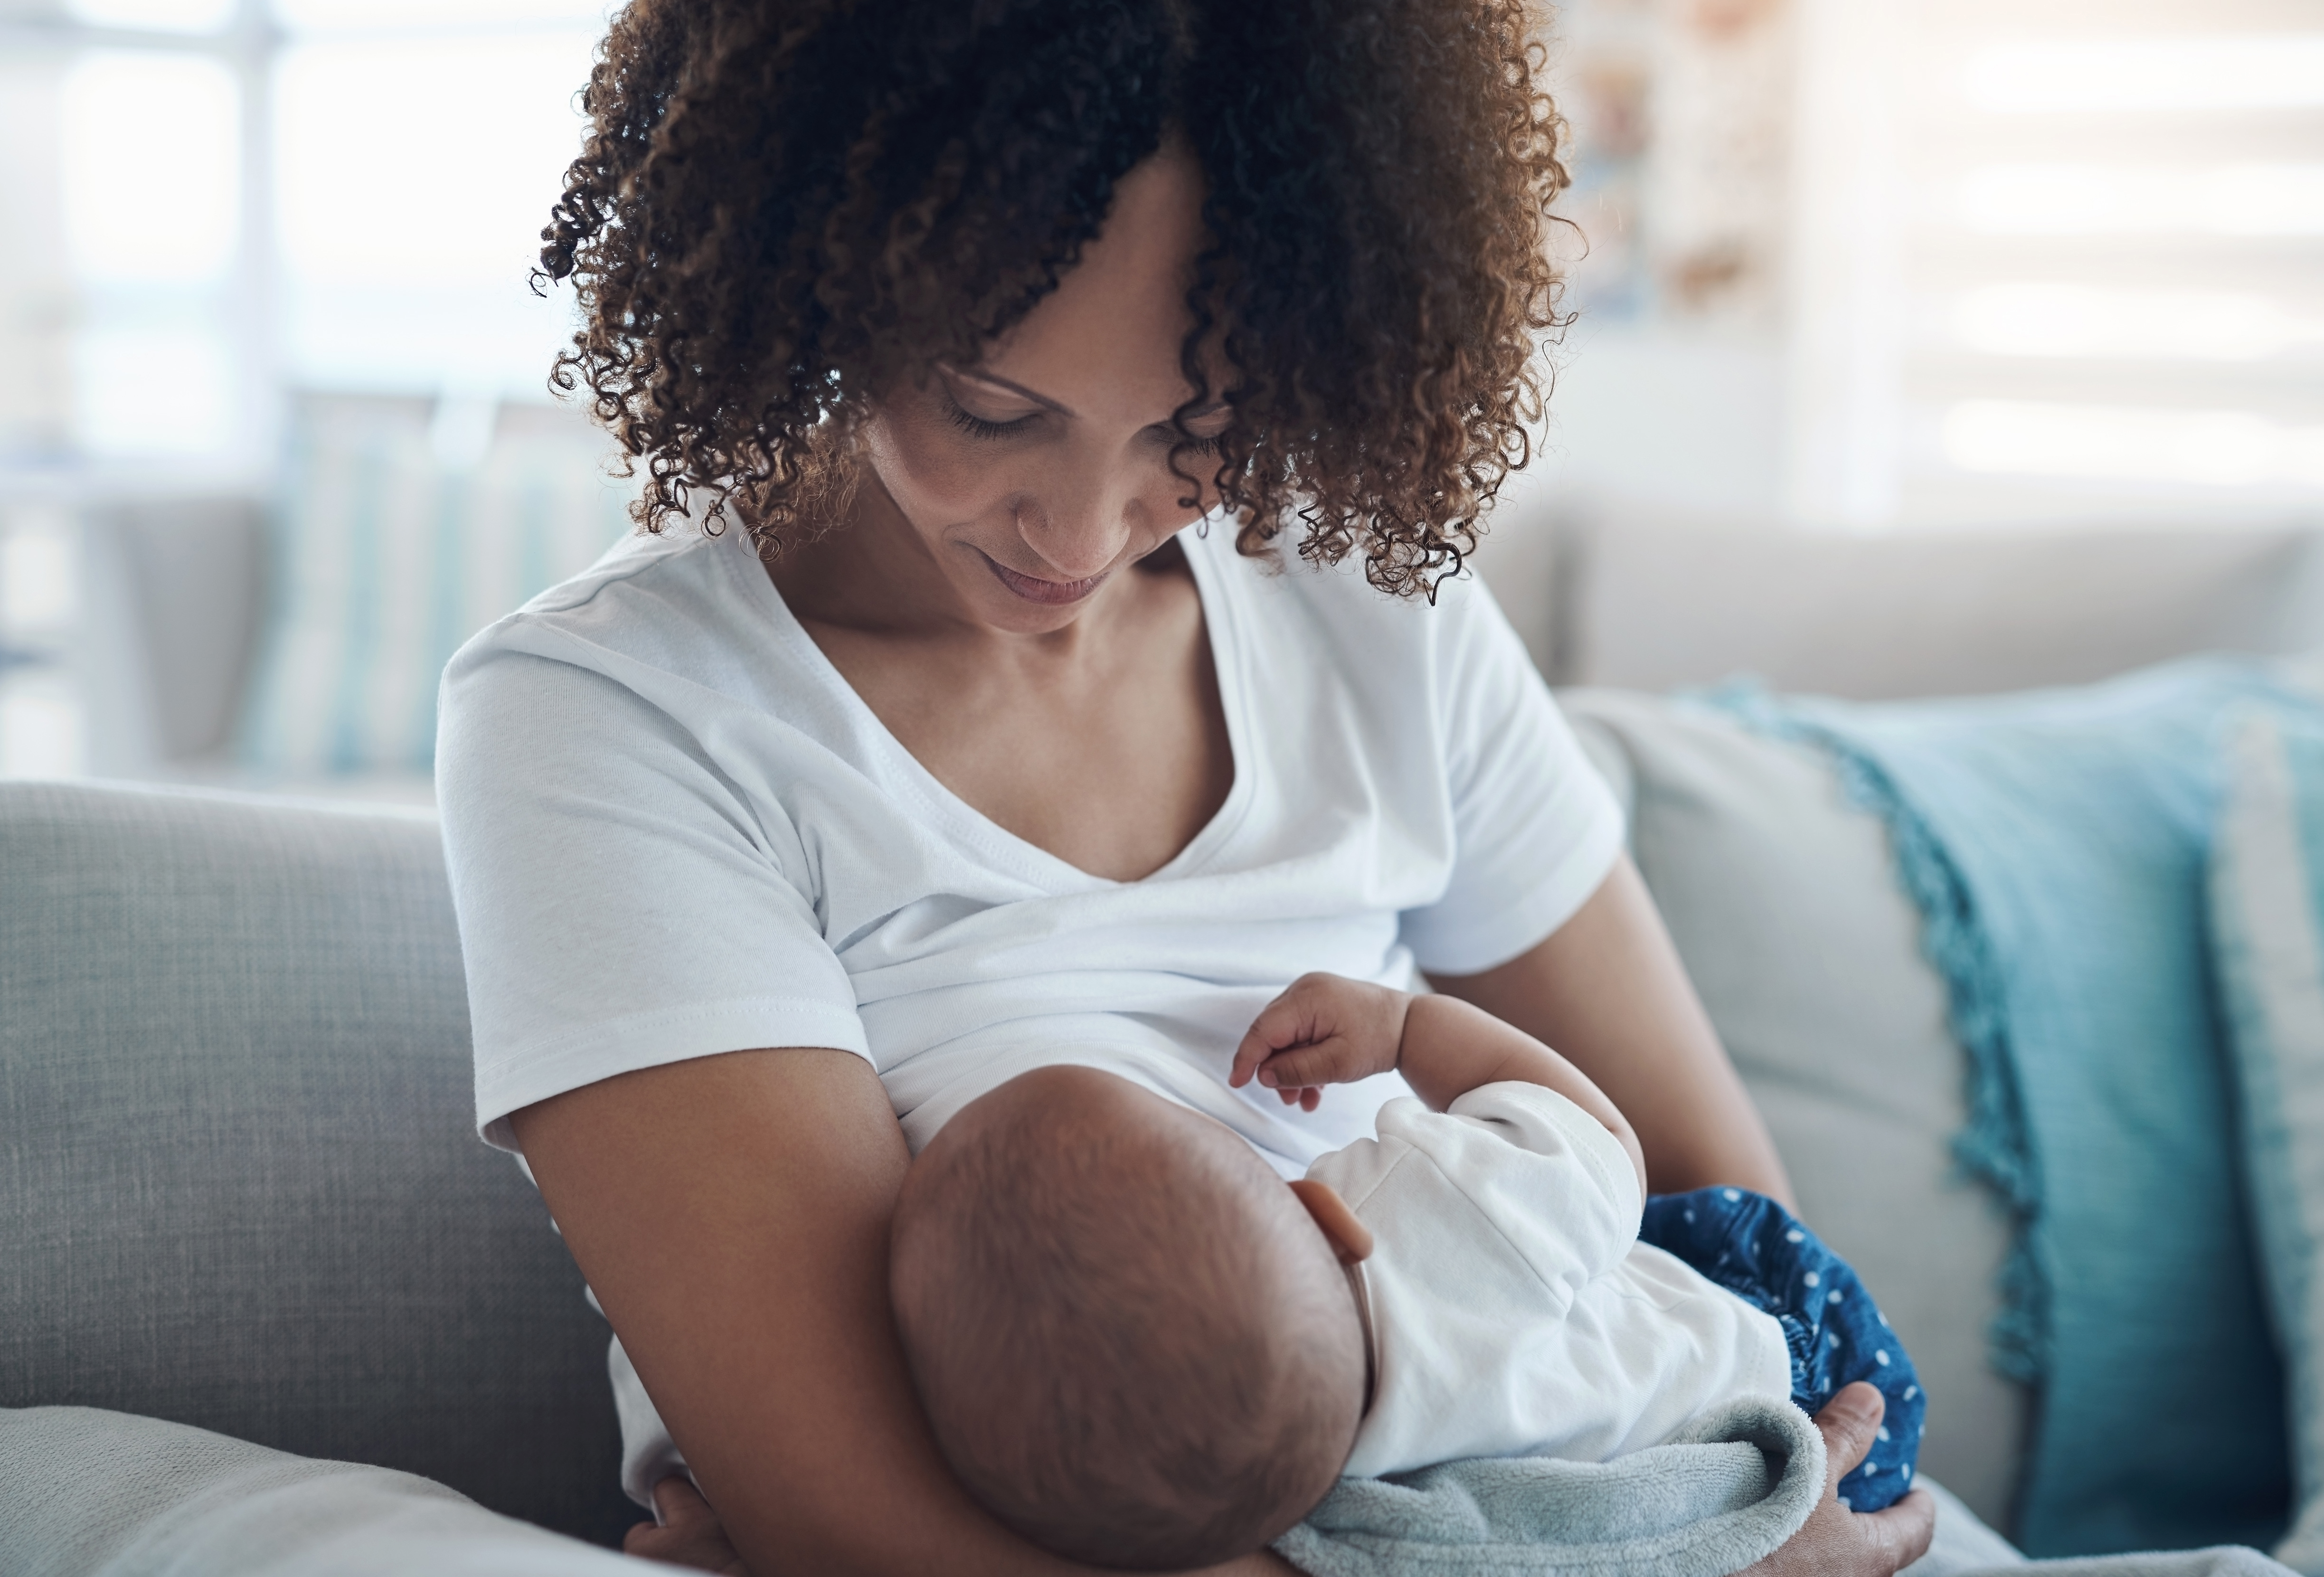 Breastfeeding support services